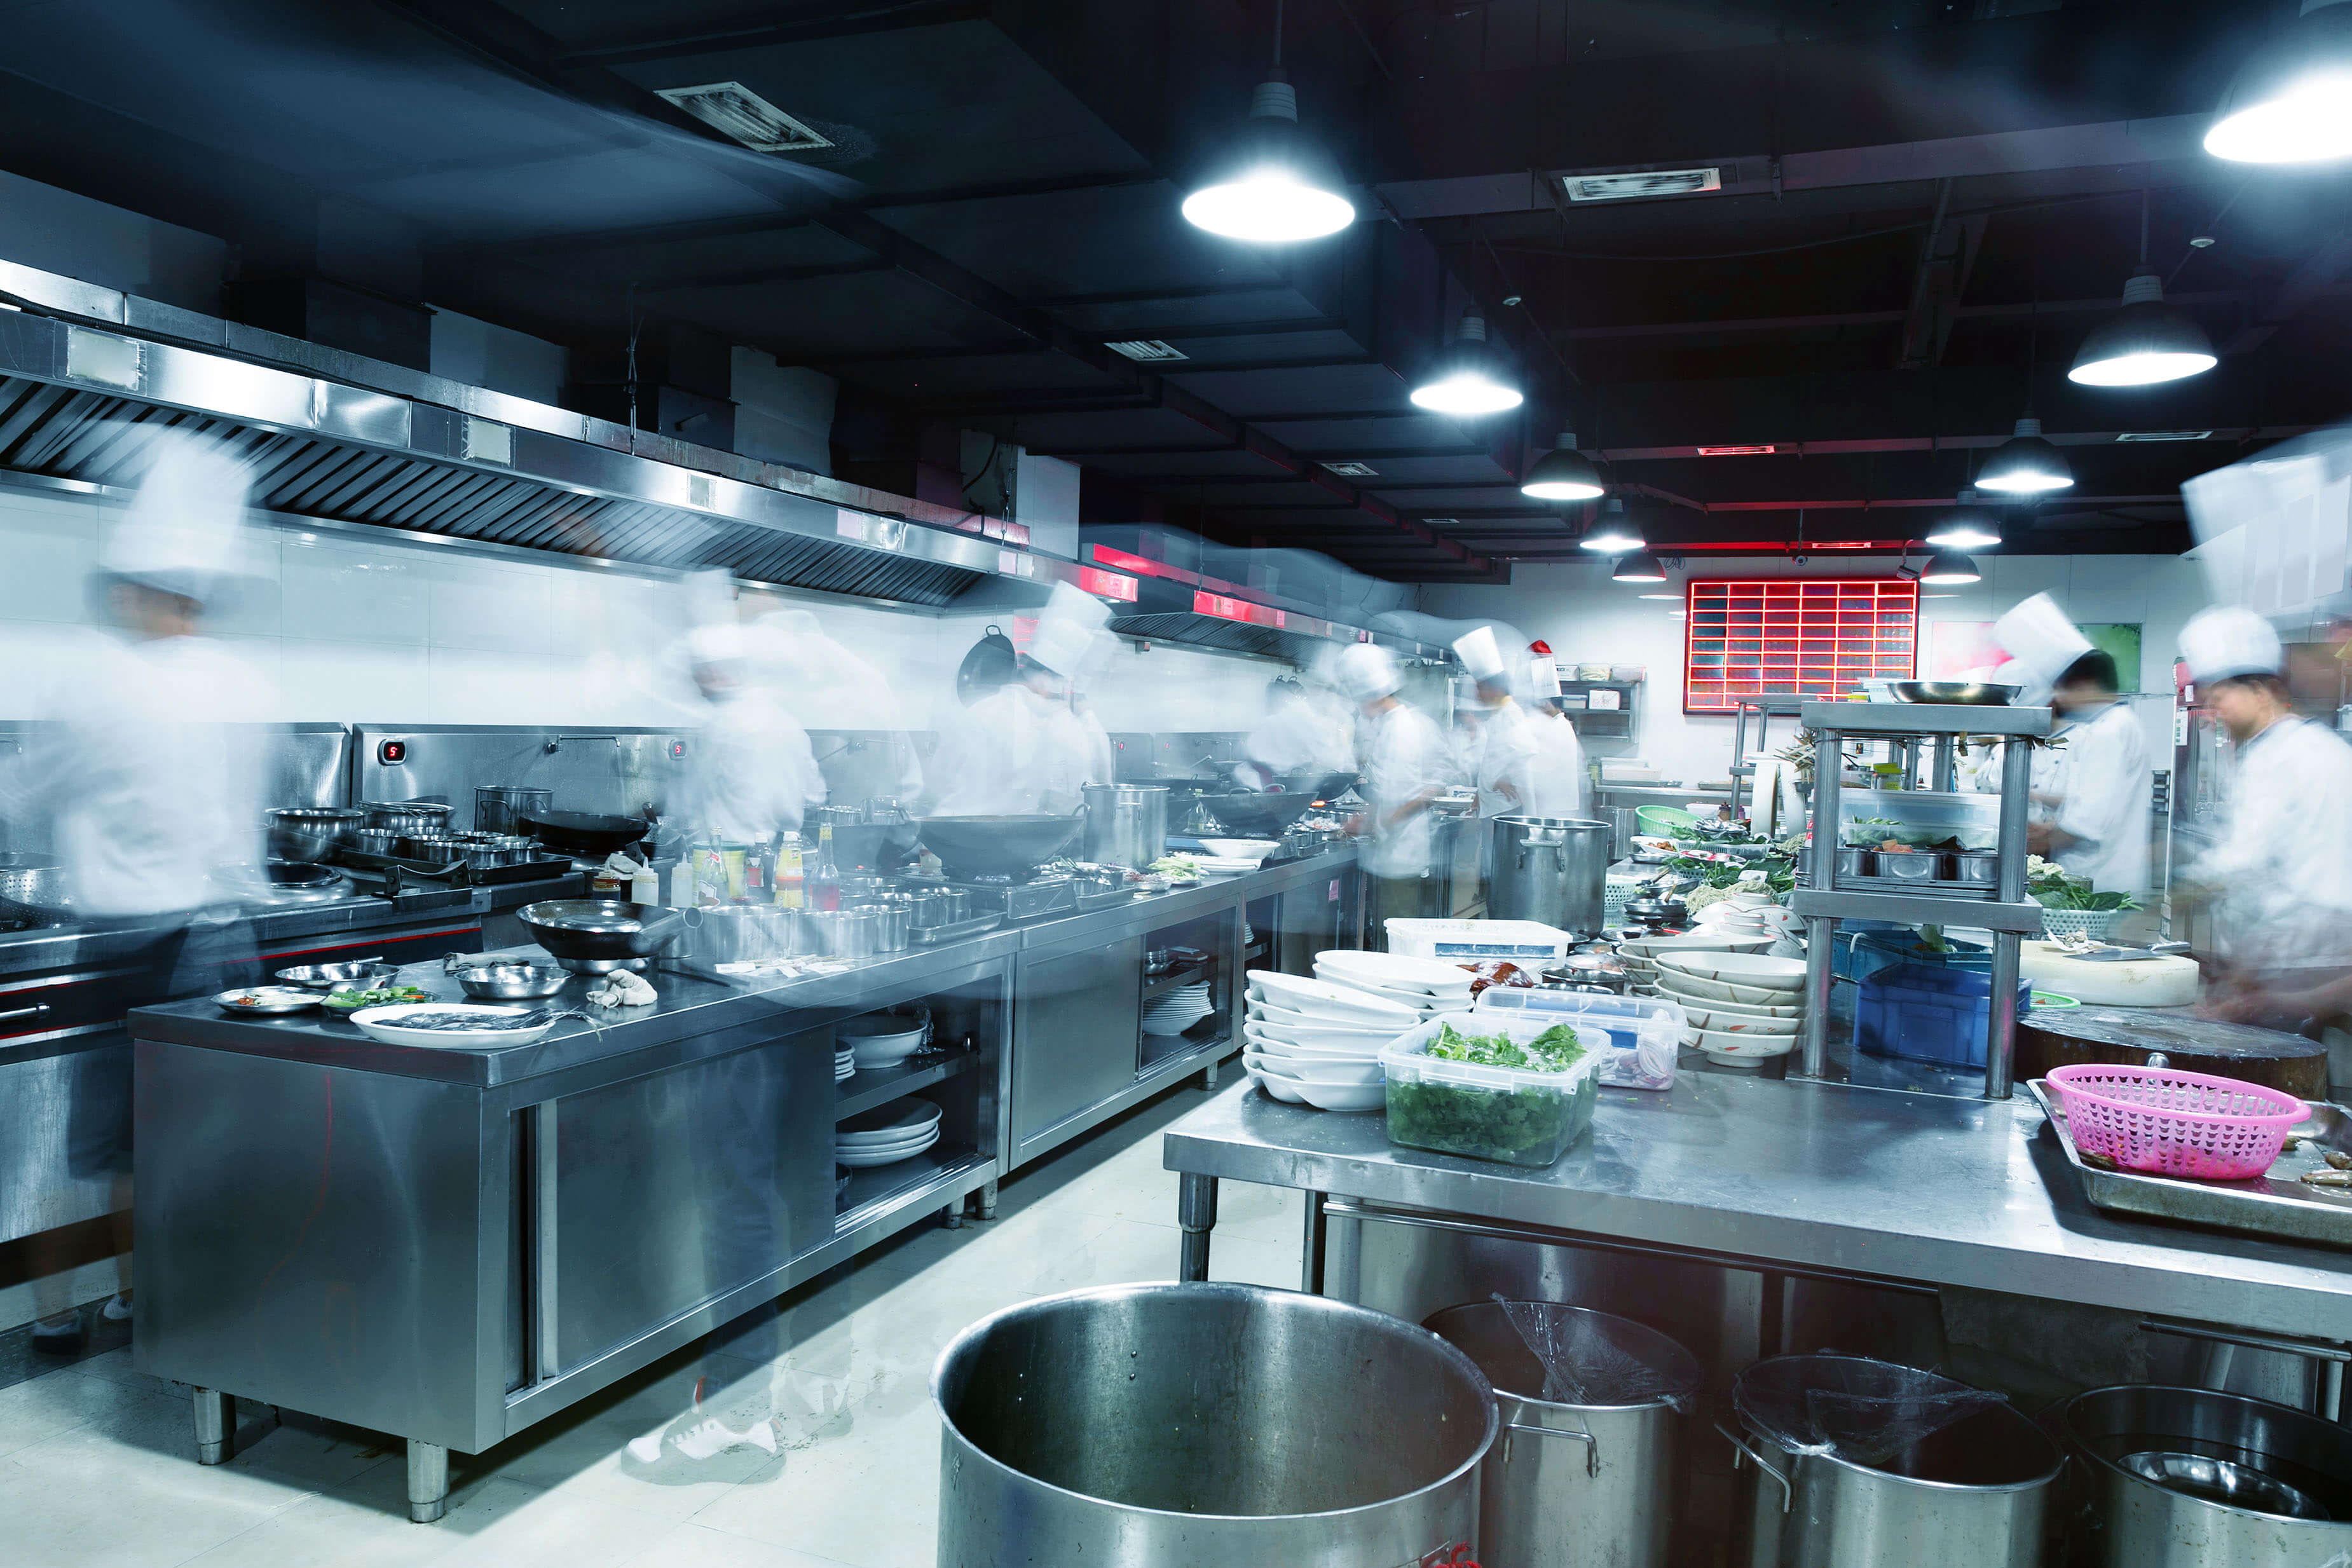 Bespoke Antimicrobial Cladding Products For The Catering Industry